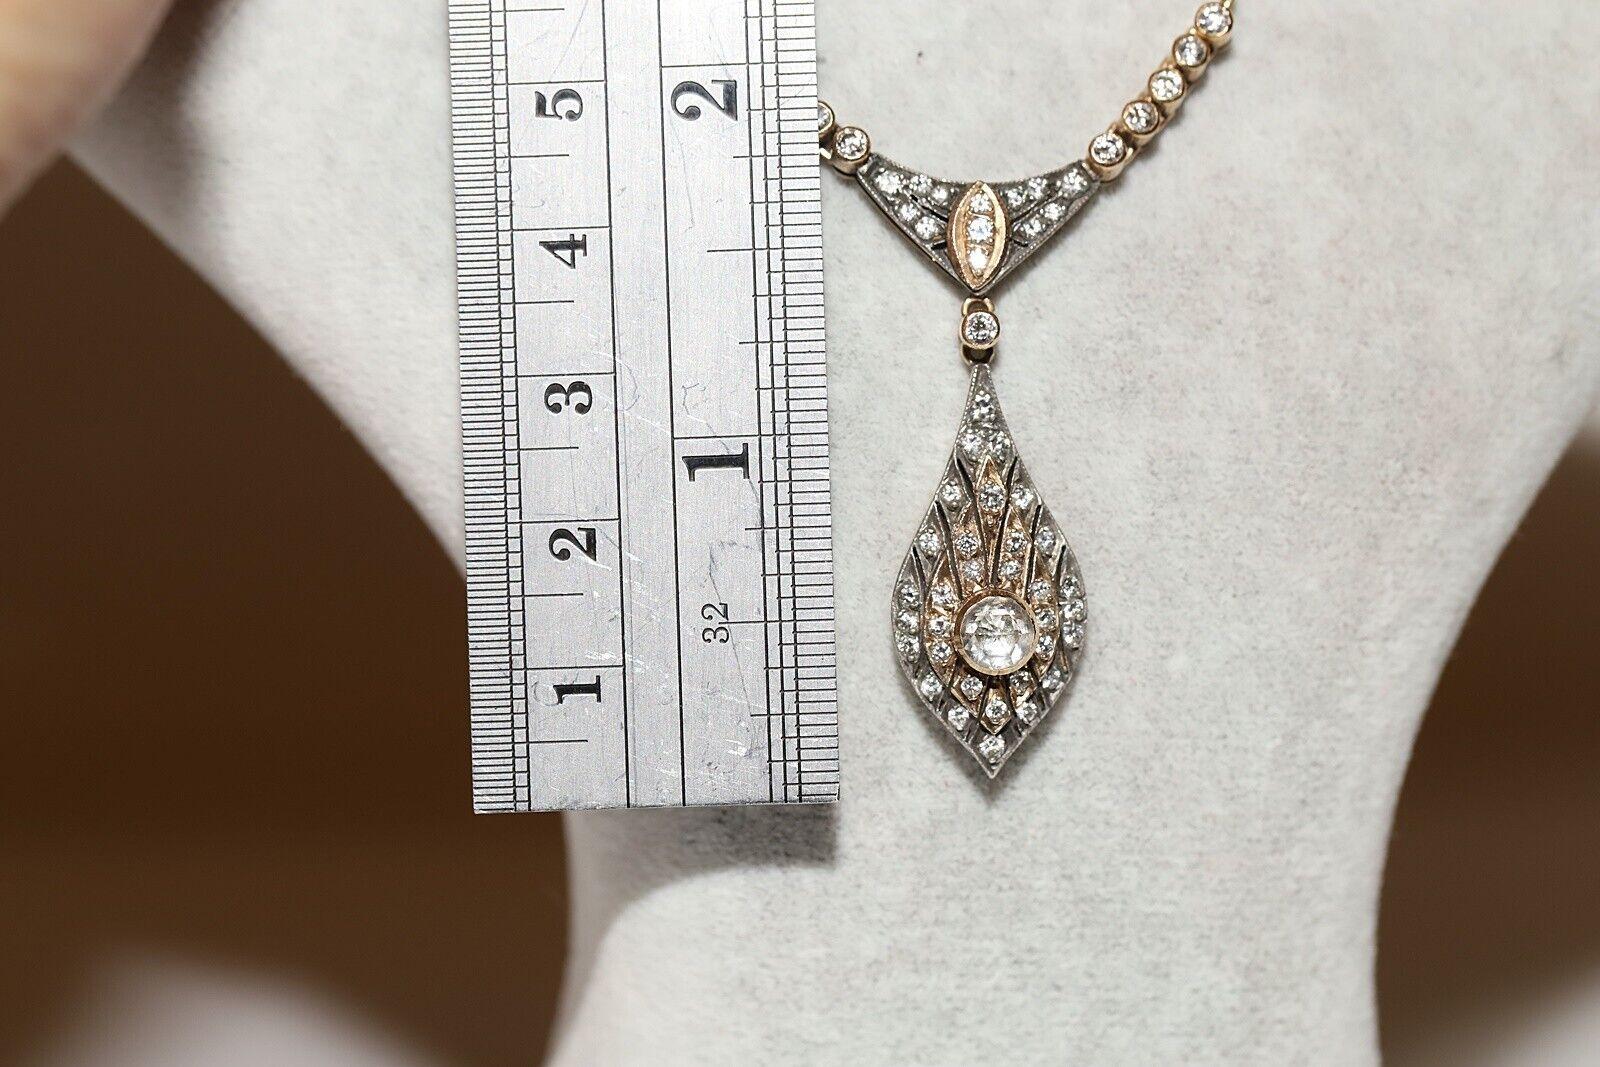 In very good condition.
Total weight is 10.4 grams.
Totally is rose cut diamond 0.25 carat.
Totally is brilliant cut diamond 1carat.
The diamond is has G-H color and vs-s1 clarity.
Total lenght is chain 35 cm.
Please contact for any questions.